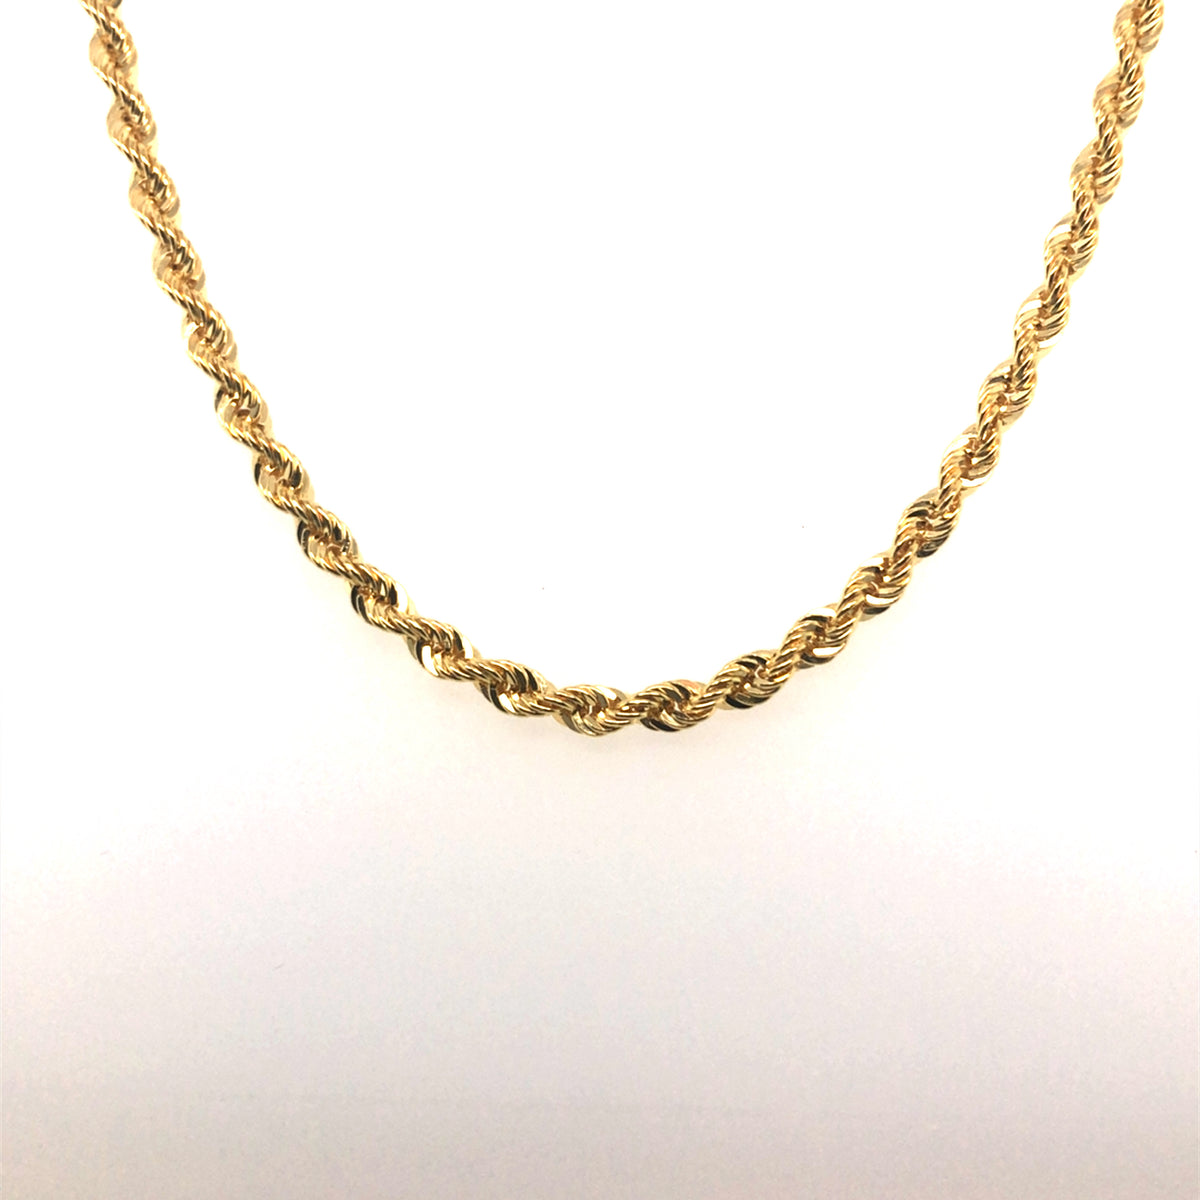 9ct Gold Rope Chain - 18inch